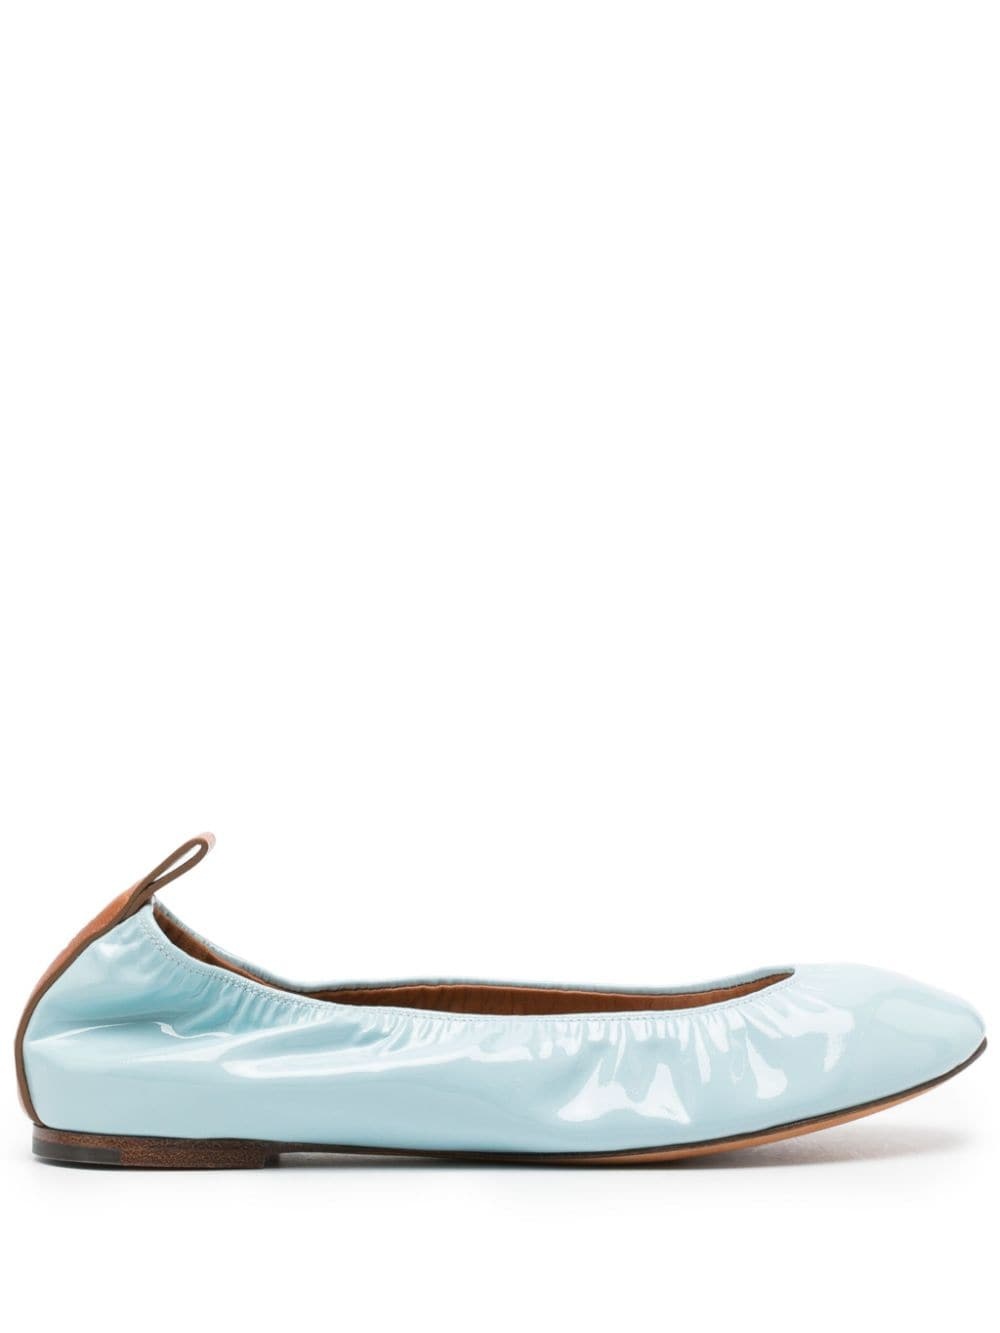 patent leather ballerina shoes - 1